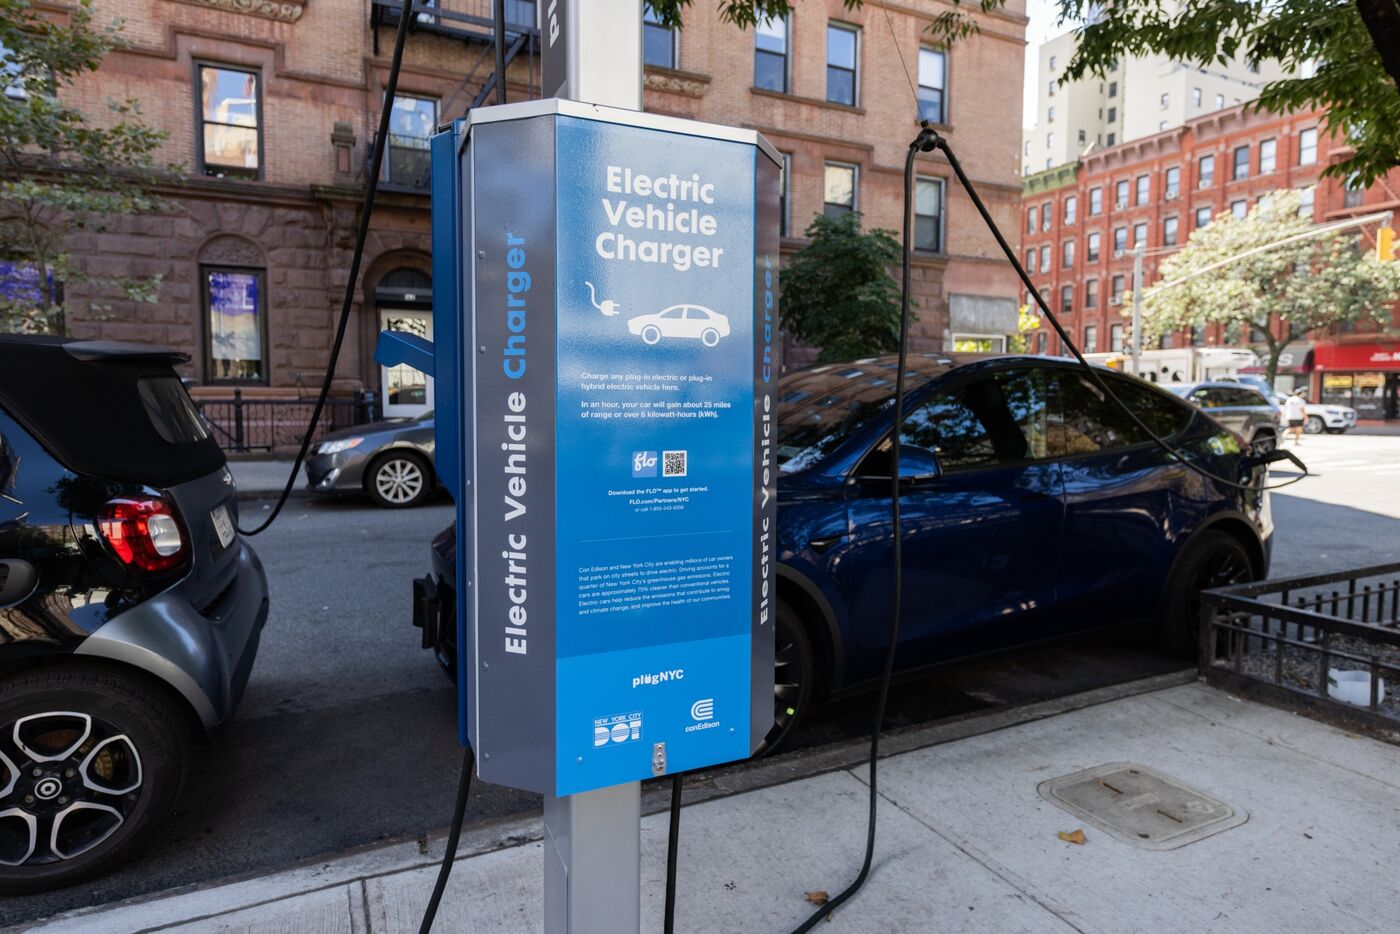 Sorry, But Joe Biden Can't Build Your EV Charger Bloomberg